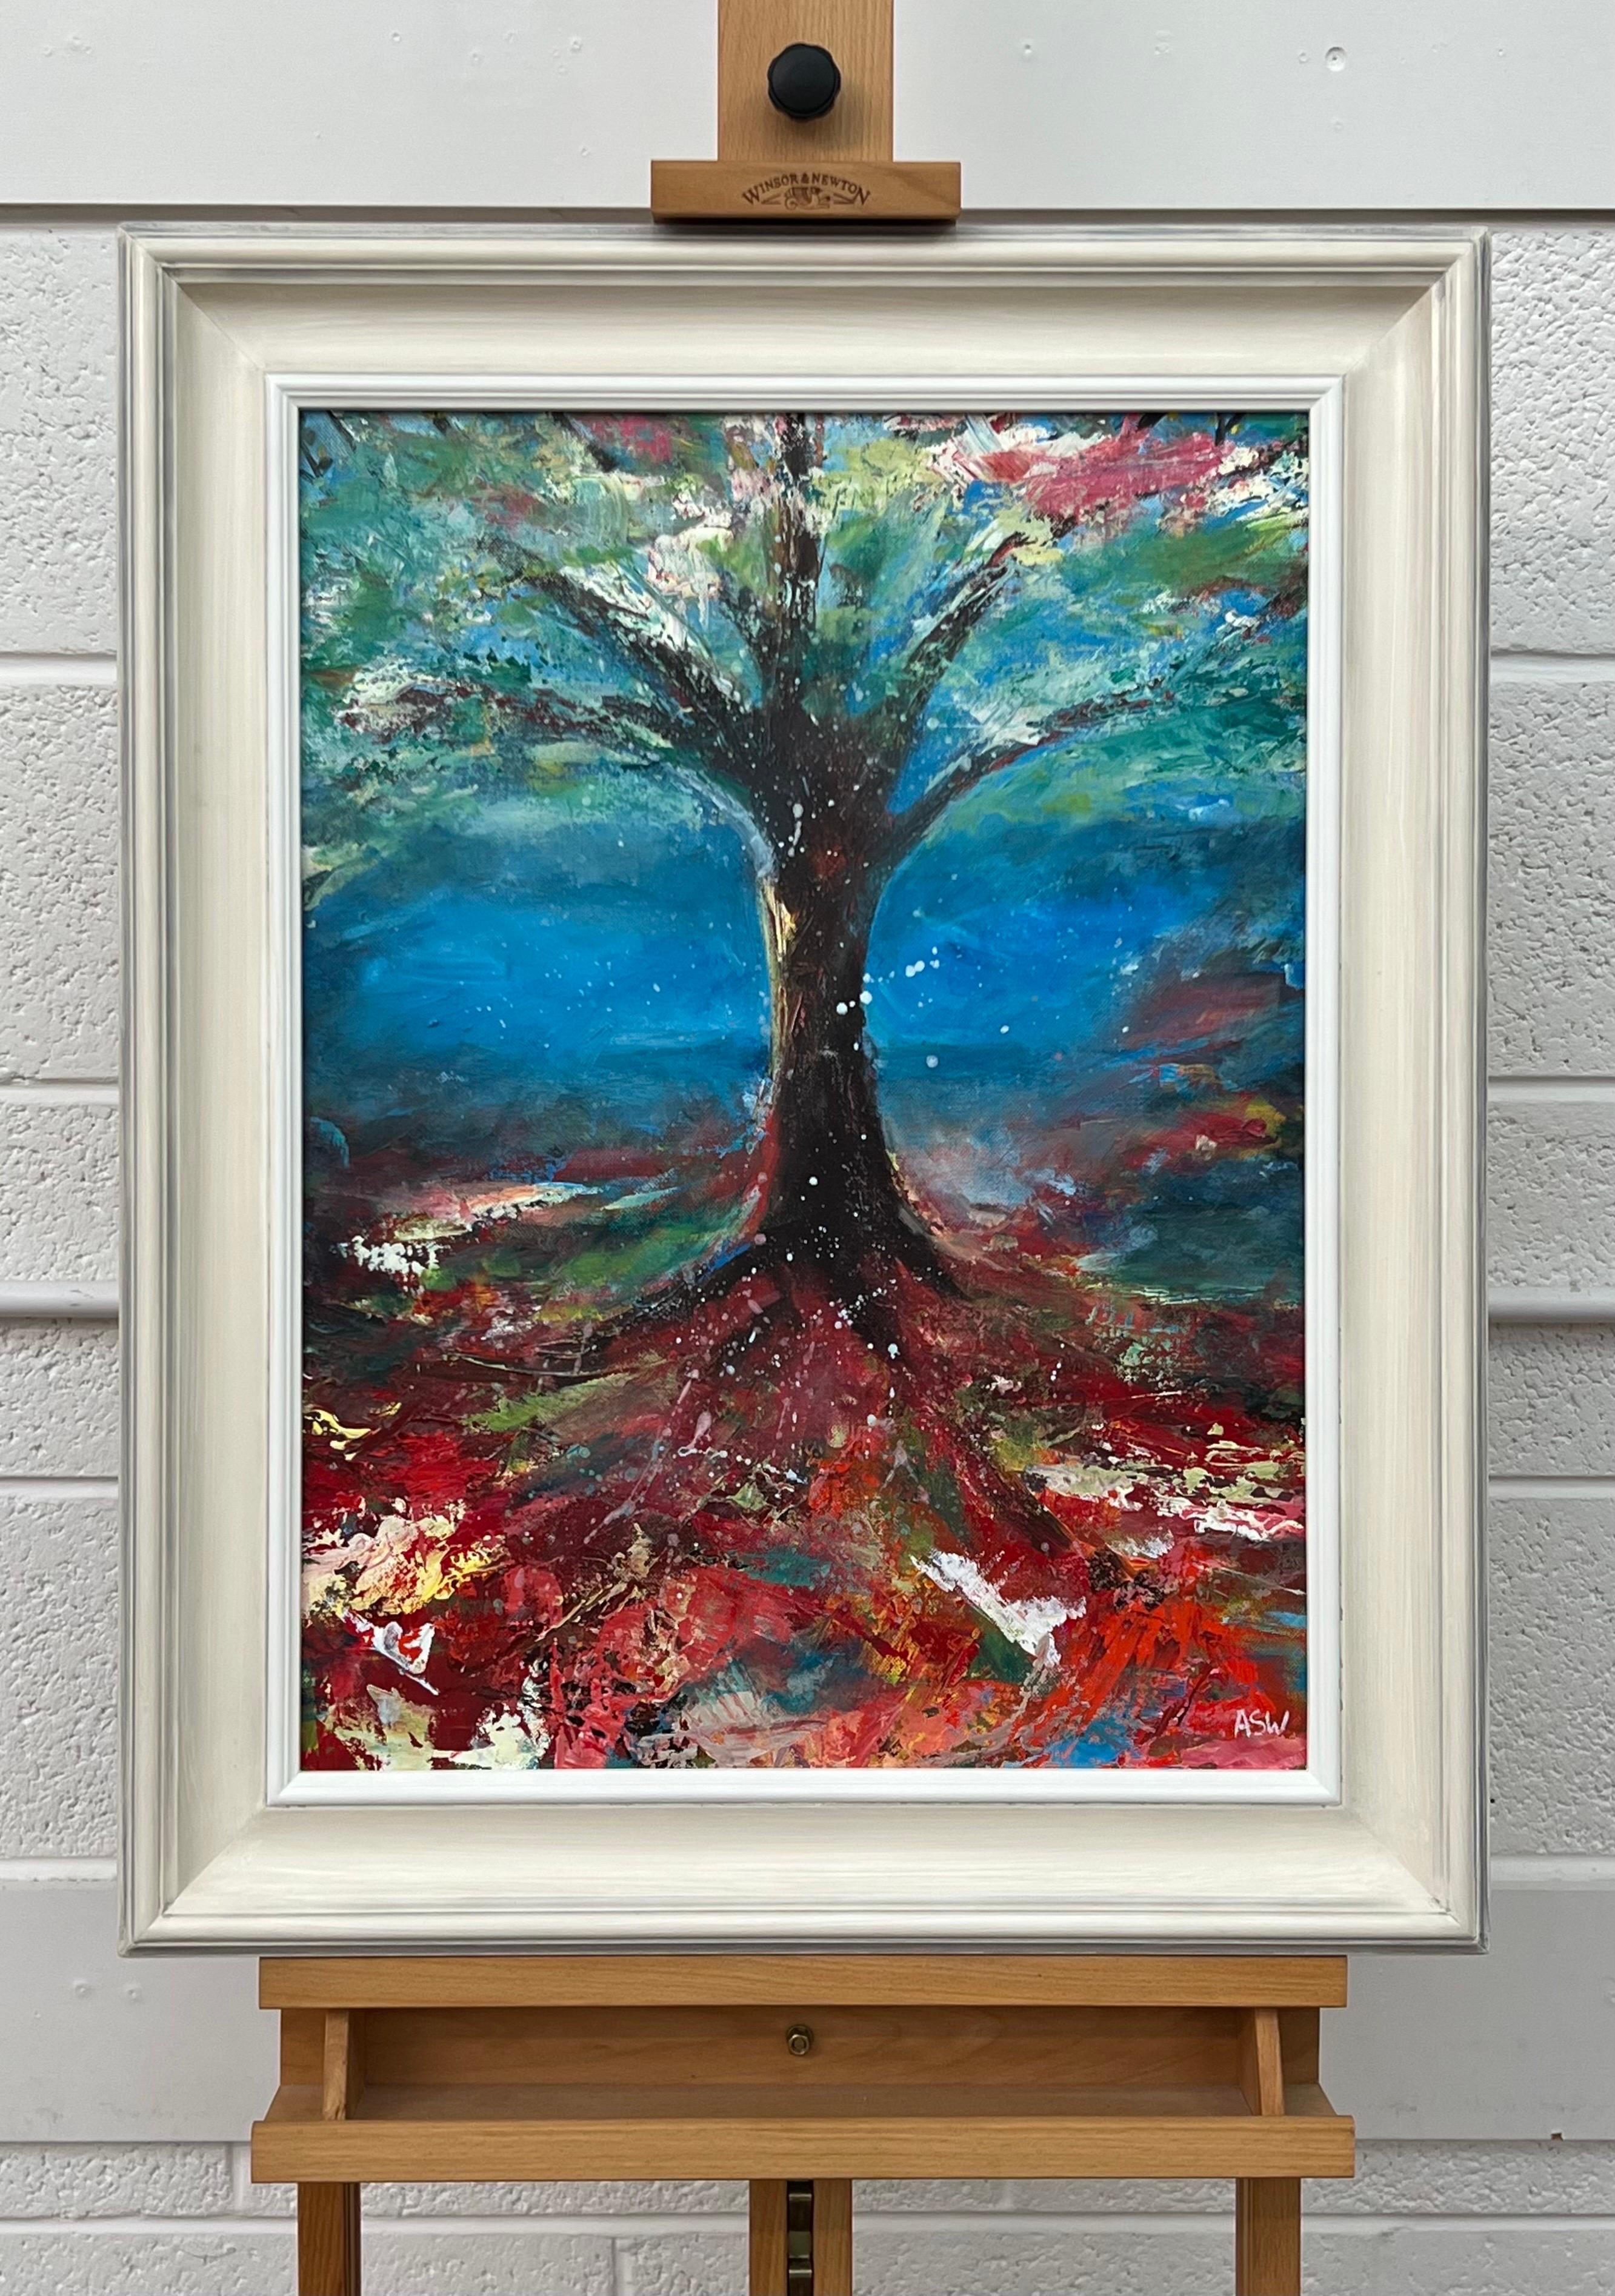 Tree with Red, Pink, White & Blue Abstract Forest Background by British Landscape Artist, Angela Wakefield. From the 'Spring Burst' Interior Design Series. Framed in a high quality contemporary off-white wooden moulding. 

Art measures 24 x 18